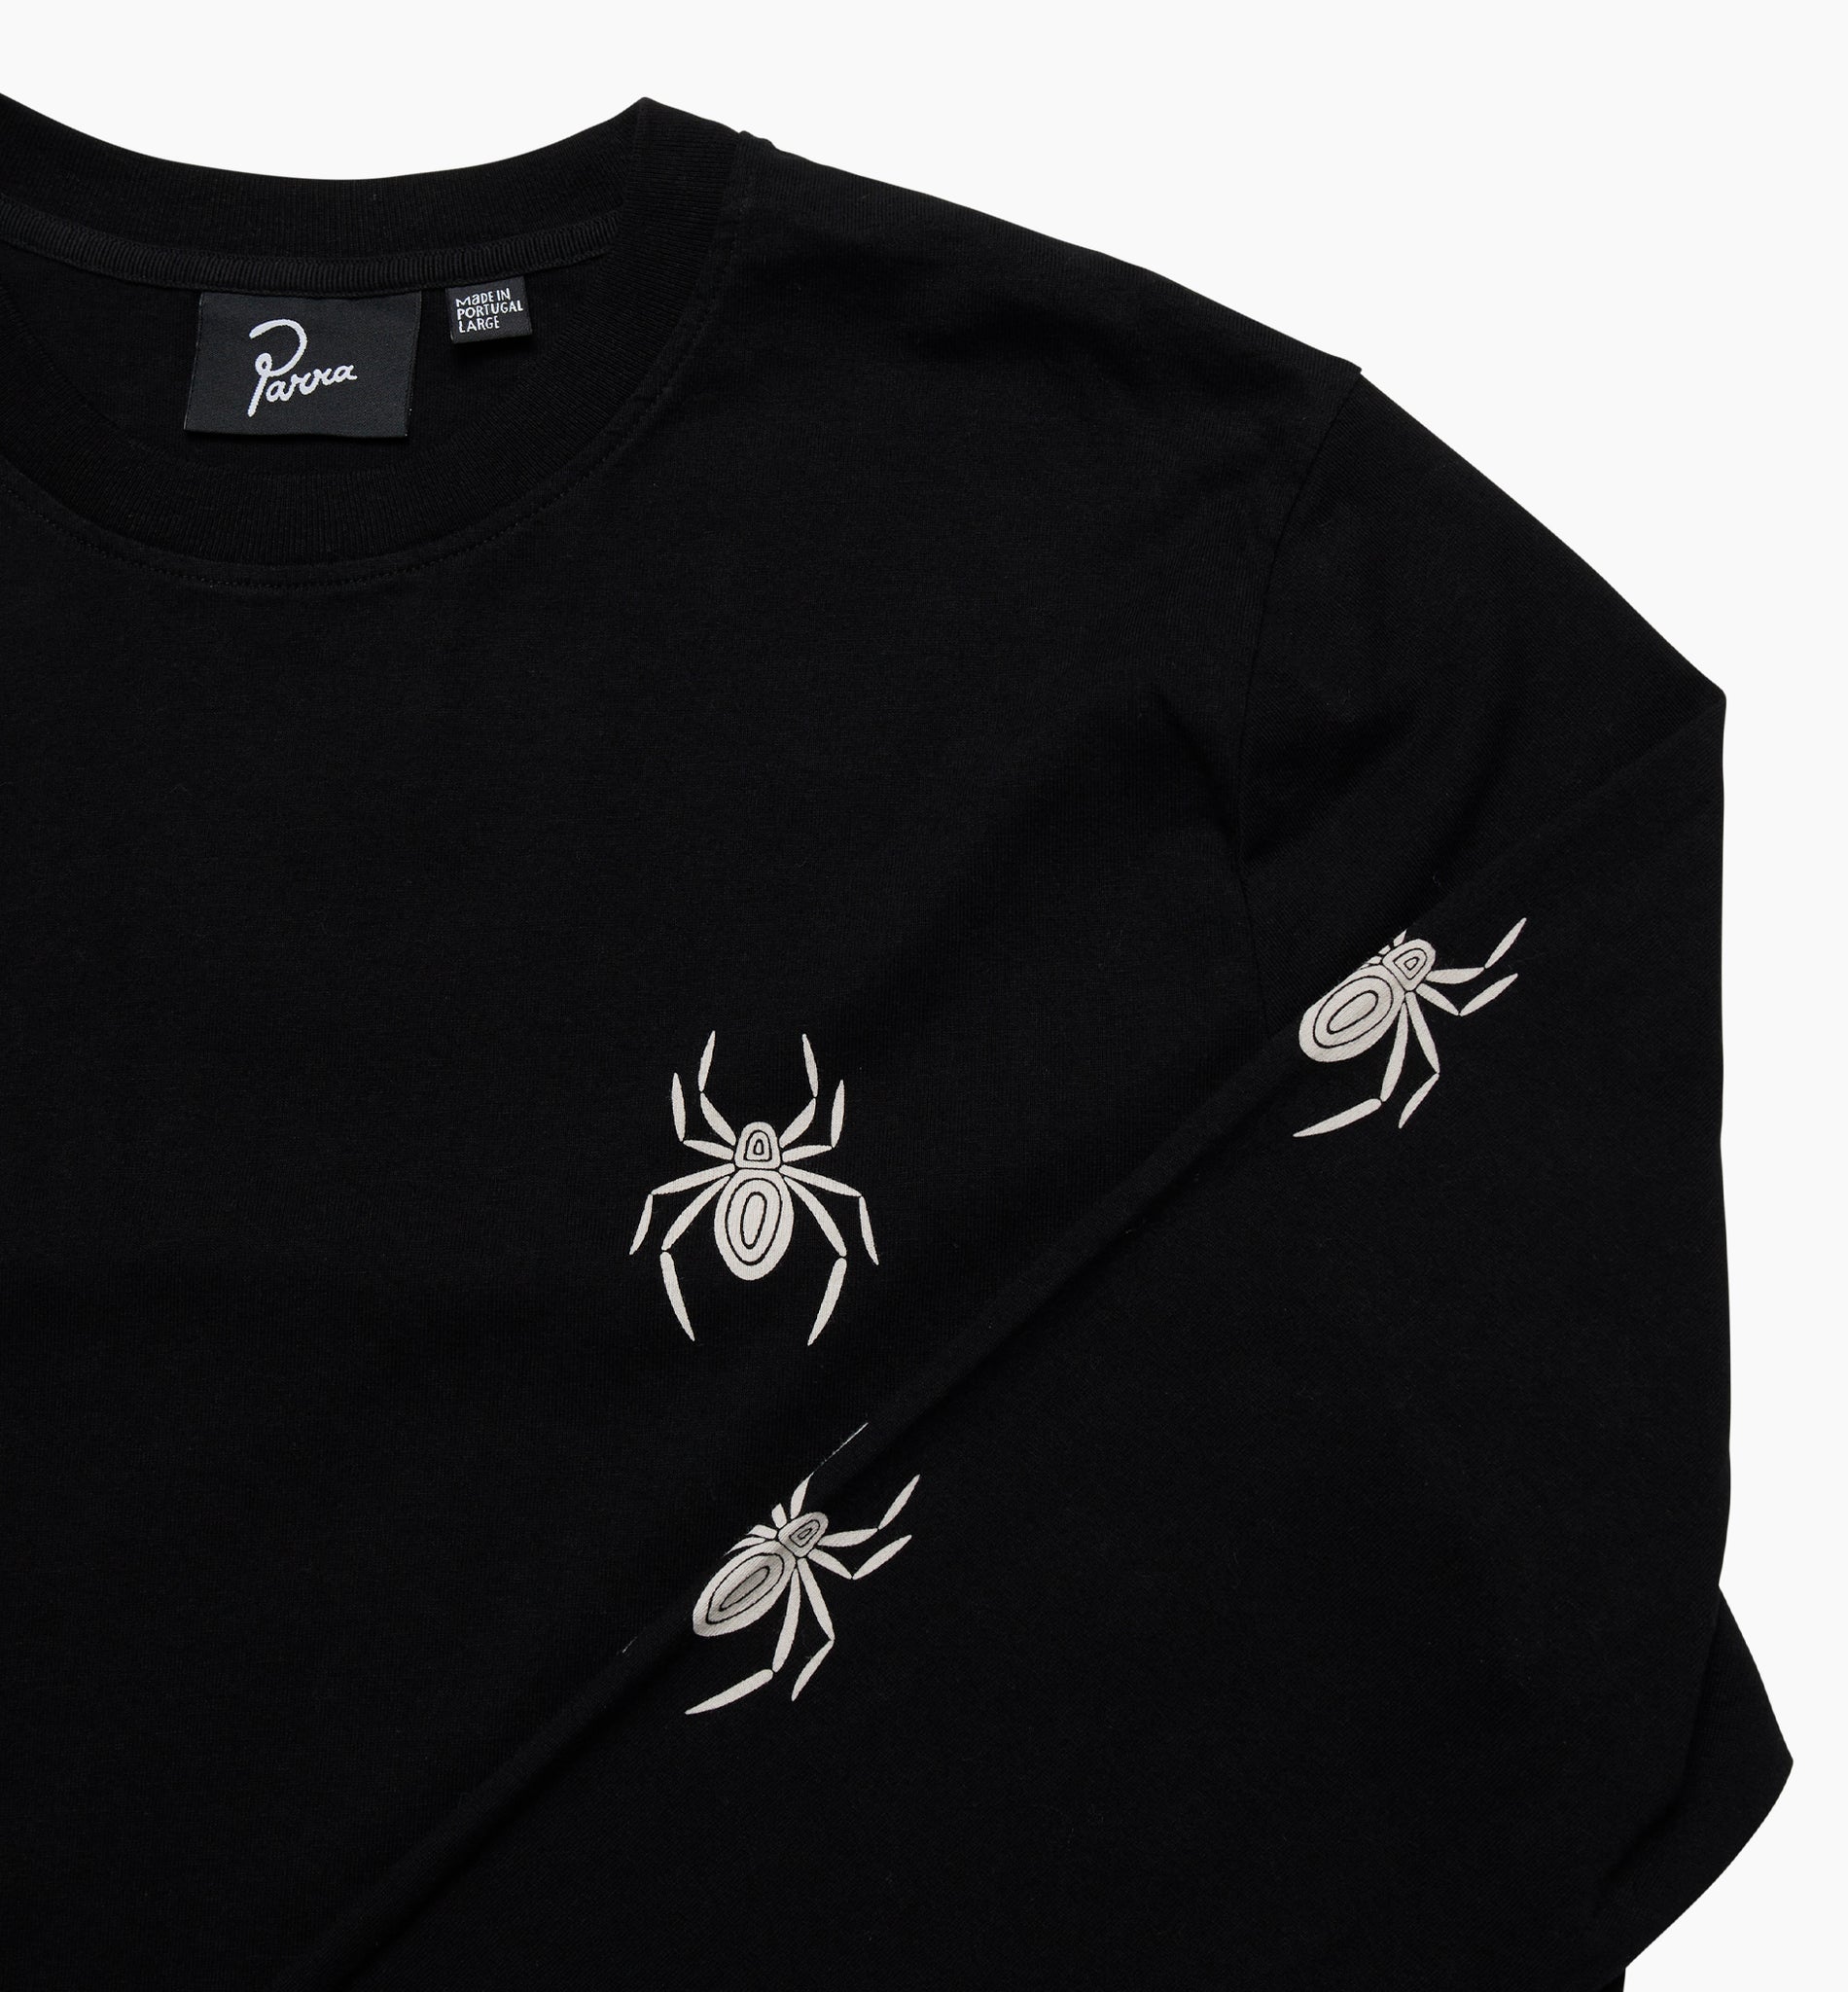 Spidered Long Sleeve T-Shirt